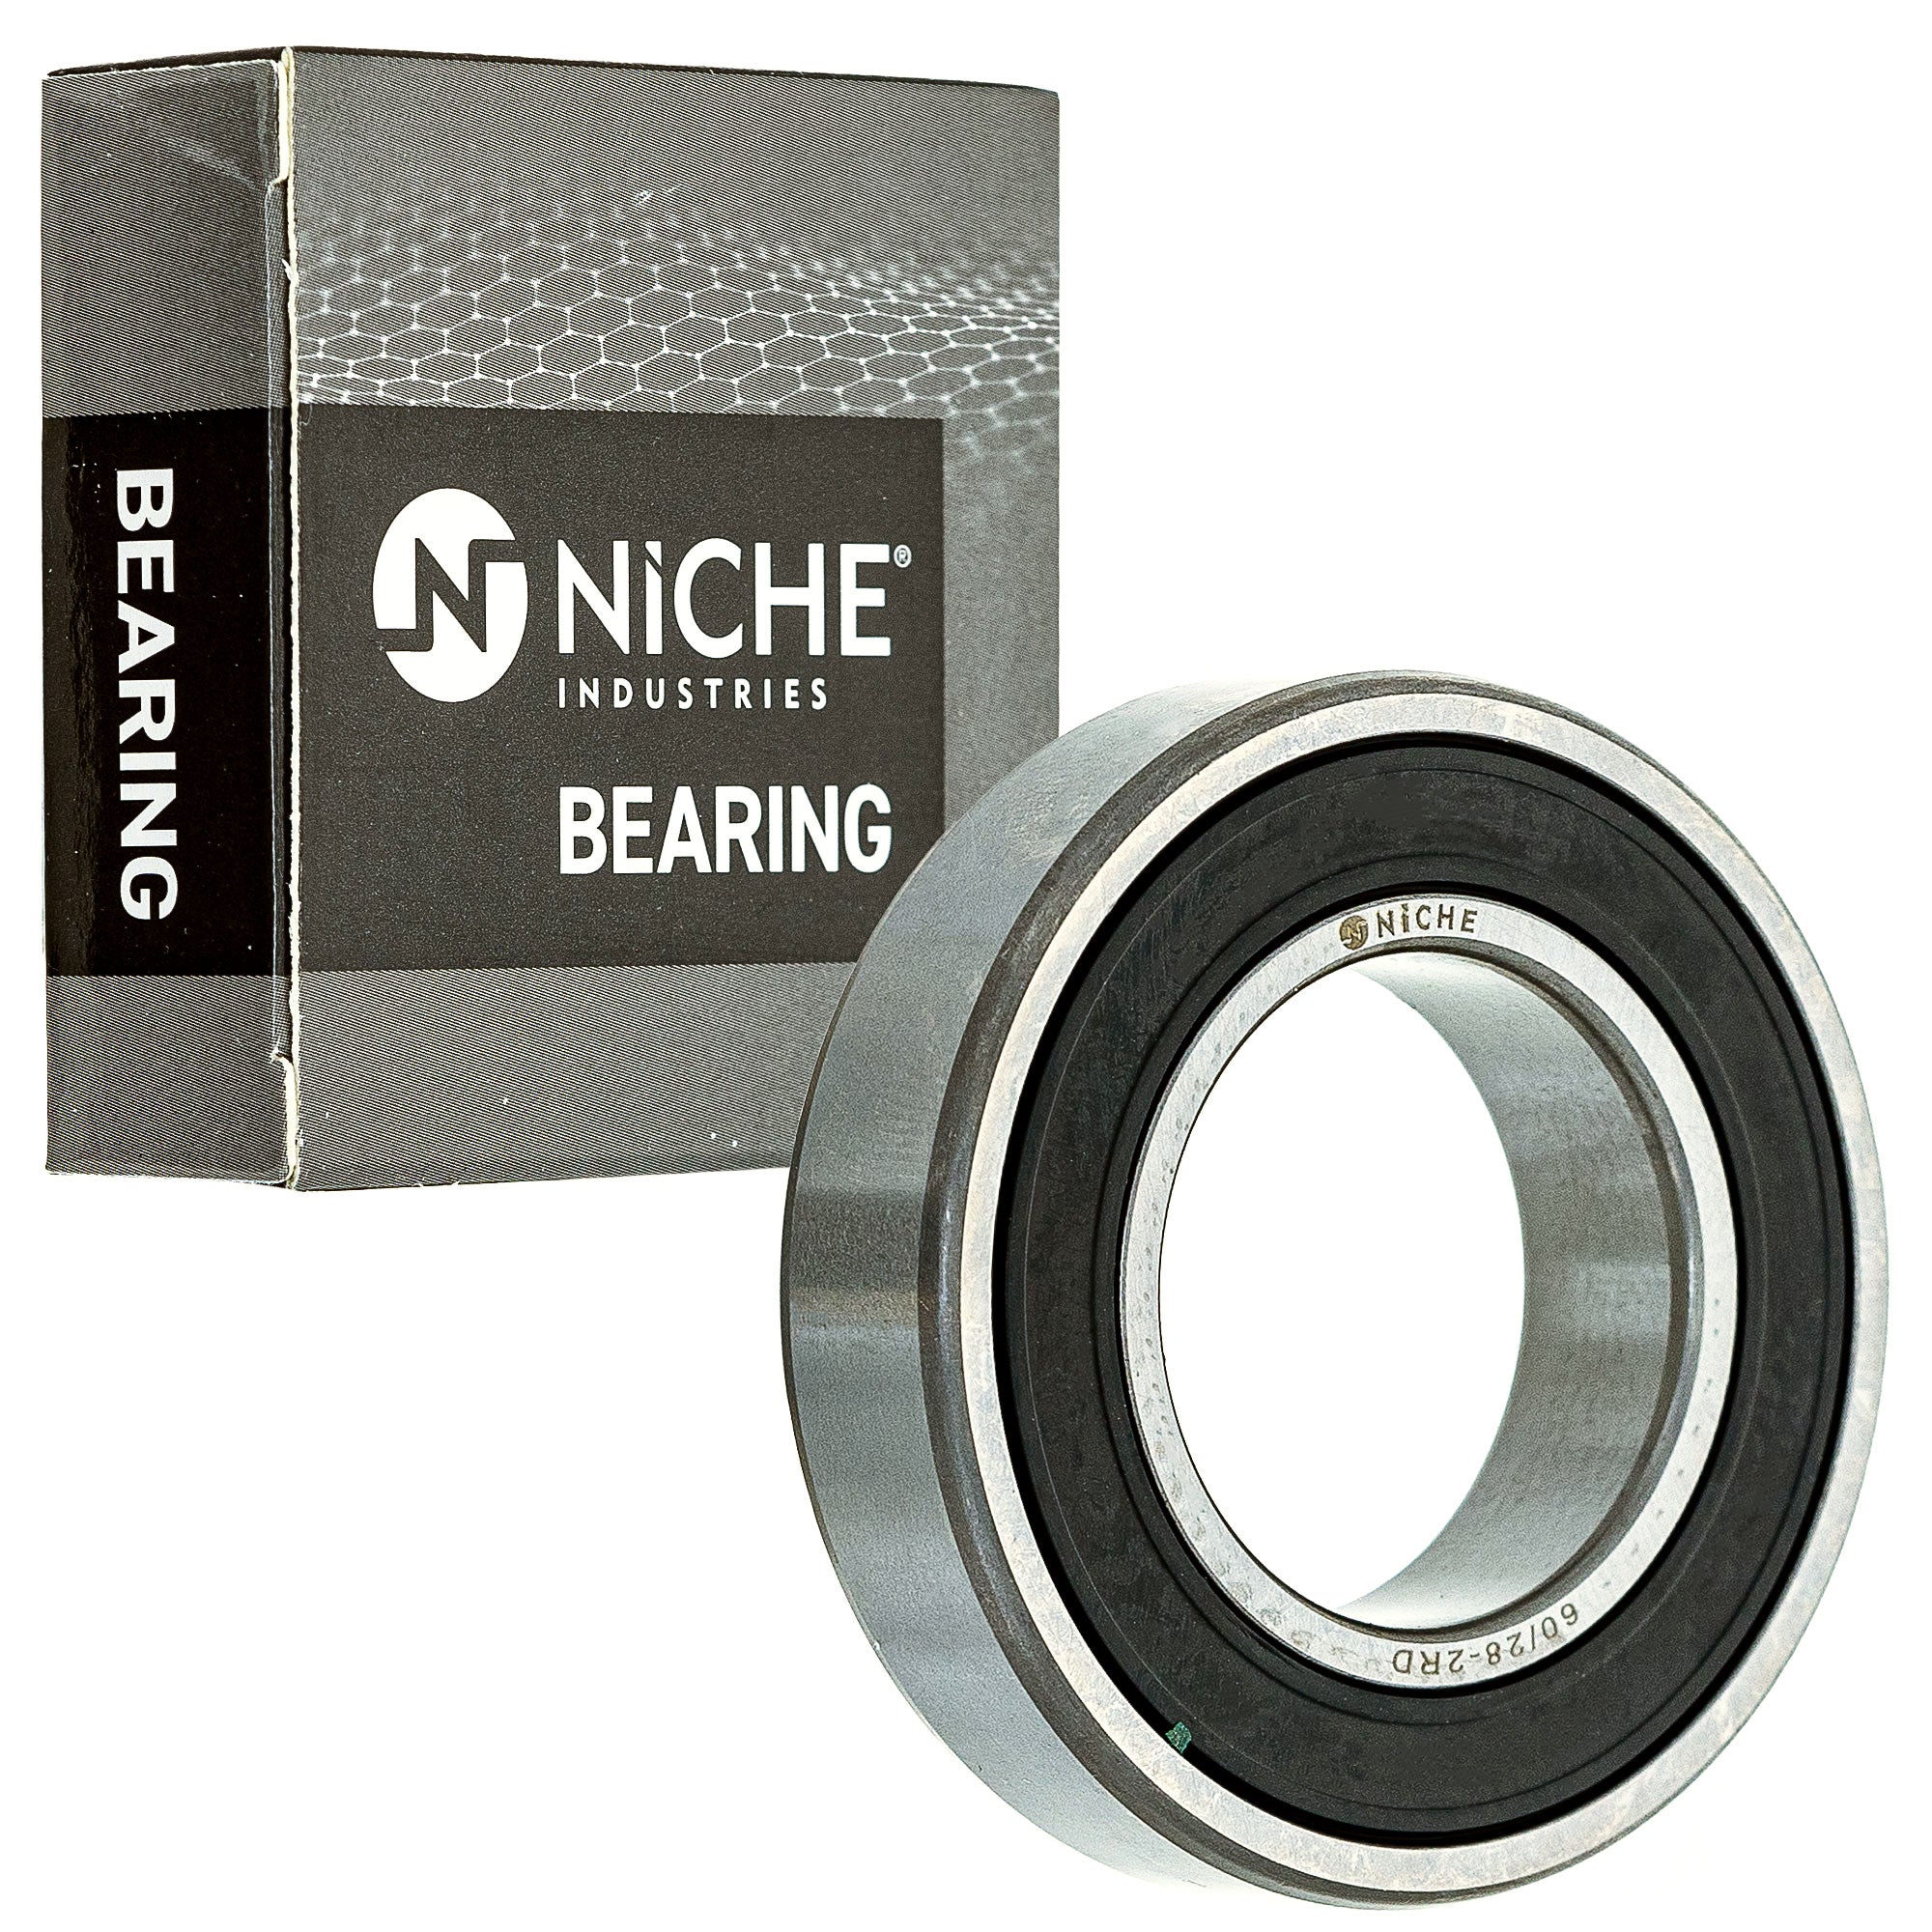 NICHE 519-CBB2321R Bearing for zOTHER SPGT25H54 SOGT26H54 SOGT22H48